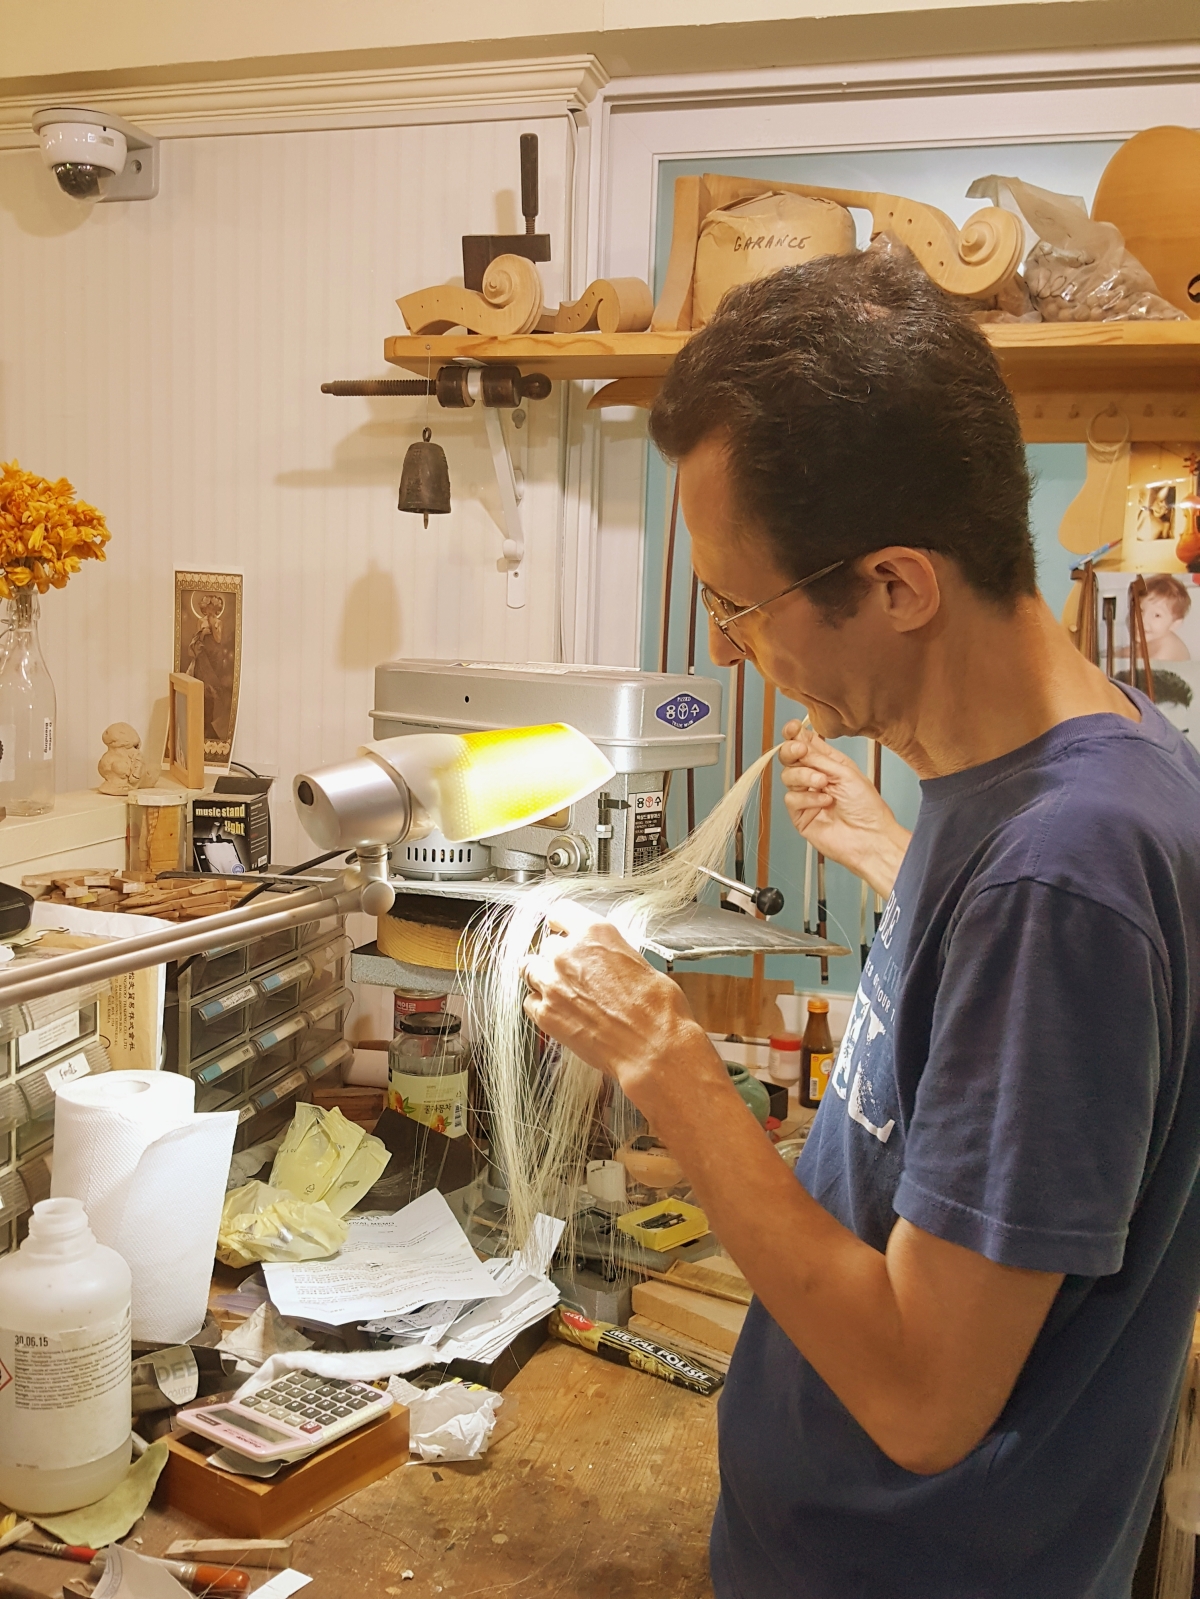 E03: Marc Chavaneau – a violin maker from Orléans, France with deep roots in South Korea